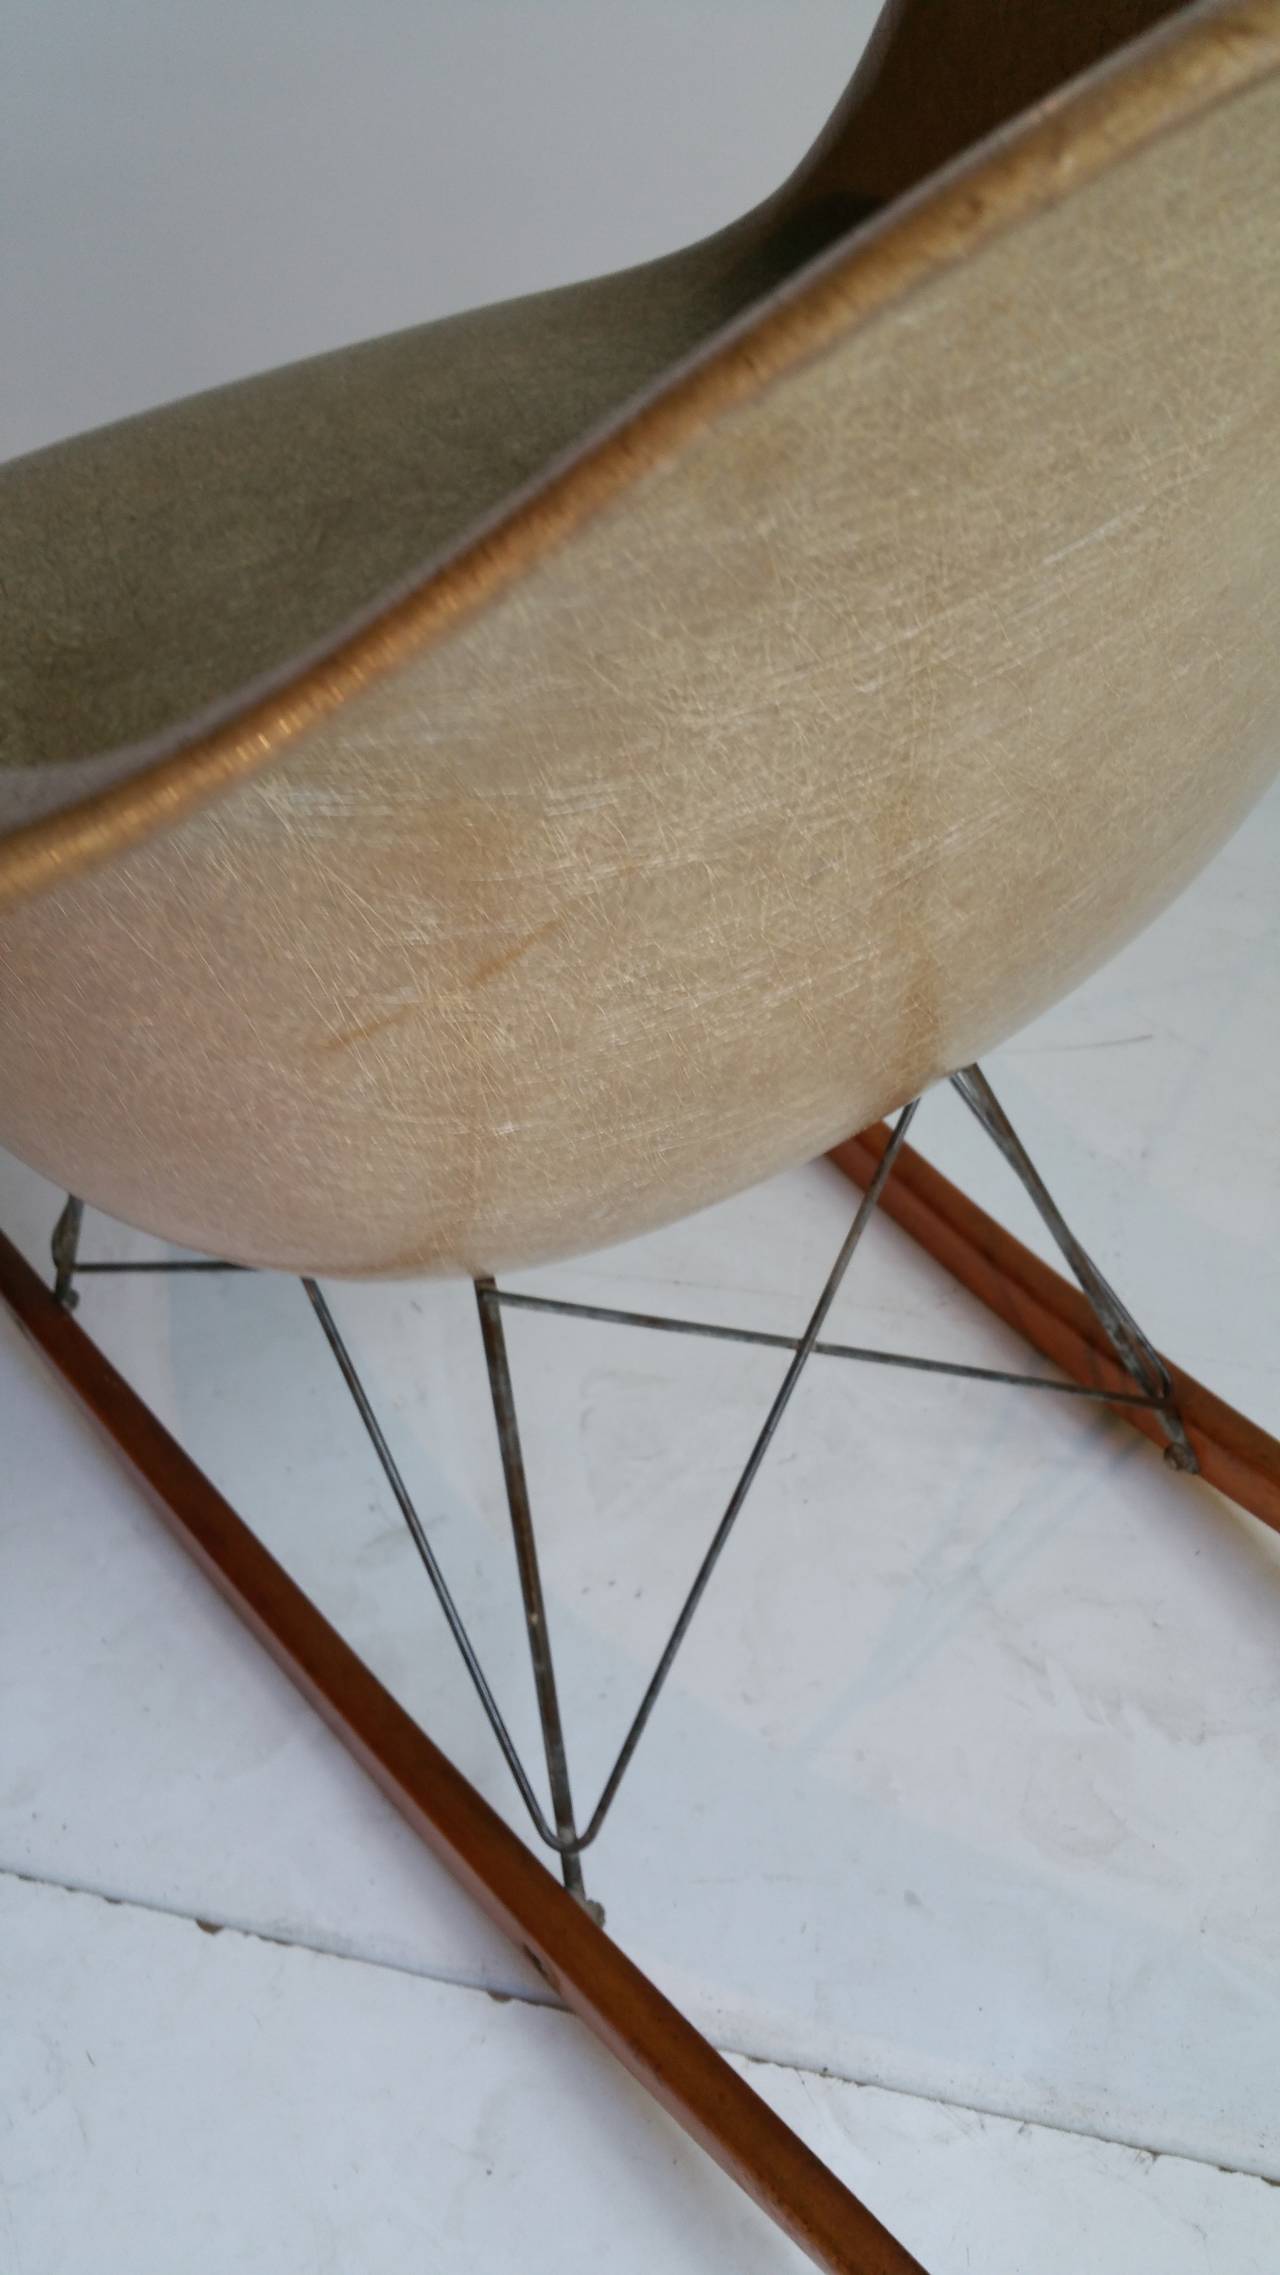 First Year Production of Charles and Ray Eames Rope-Edge Rocker, Zenith Labell 1